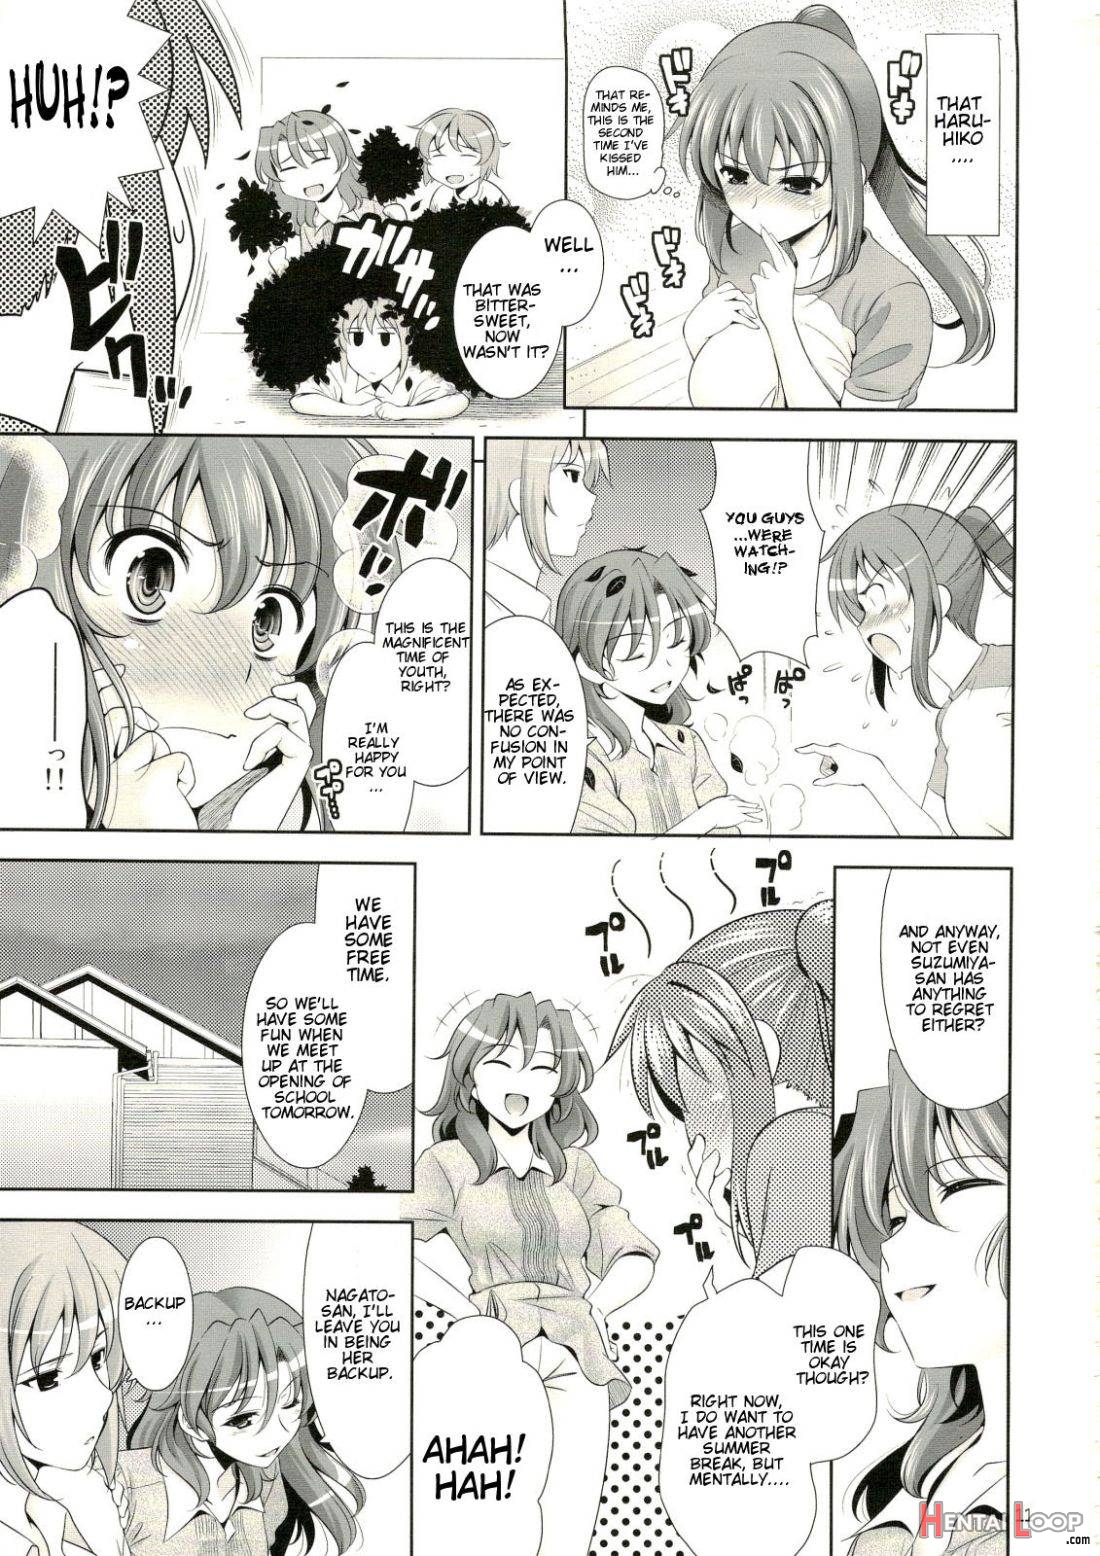 Manatsu no Yo no Yume no Mata Yume no Mata Yume page 8